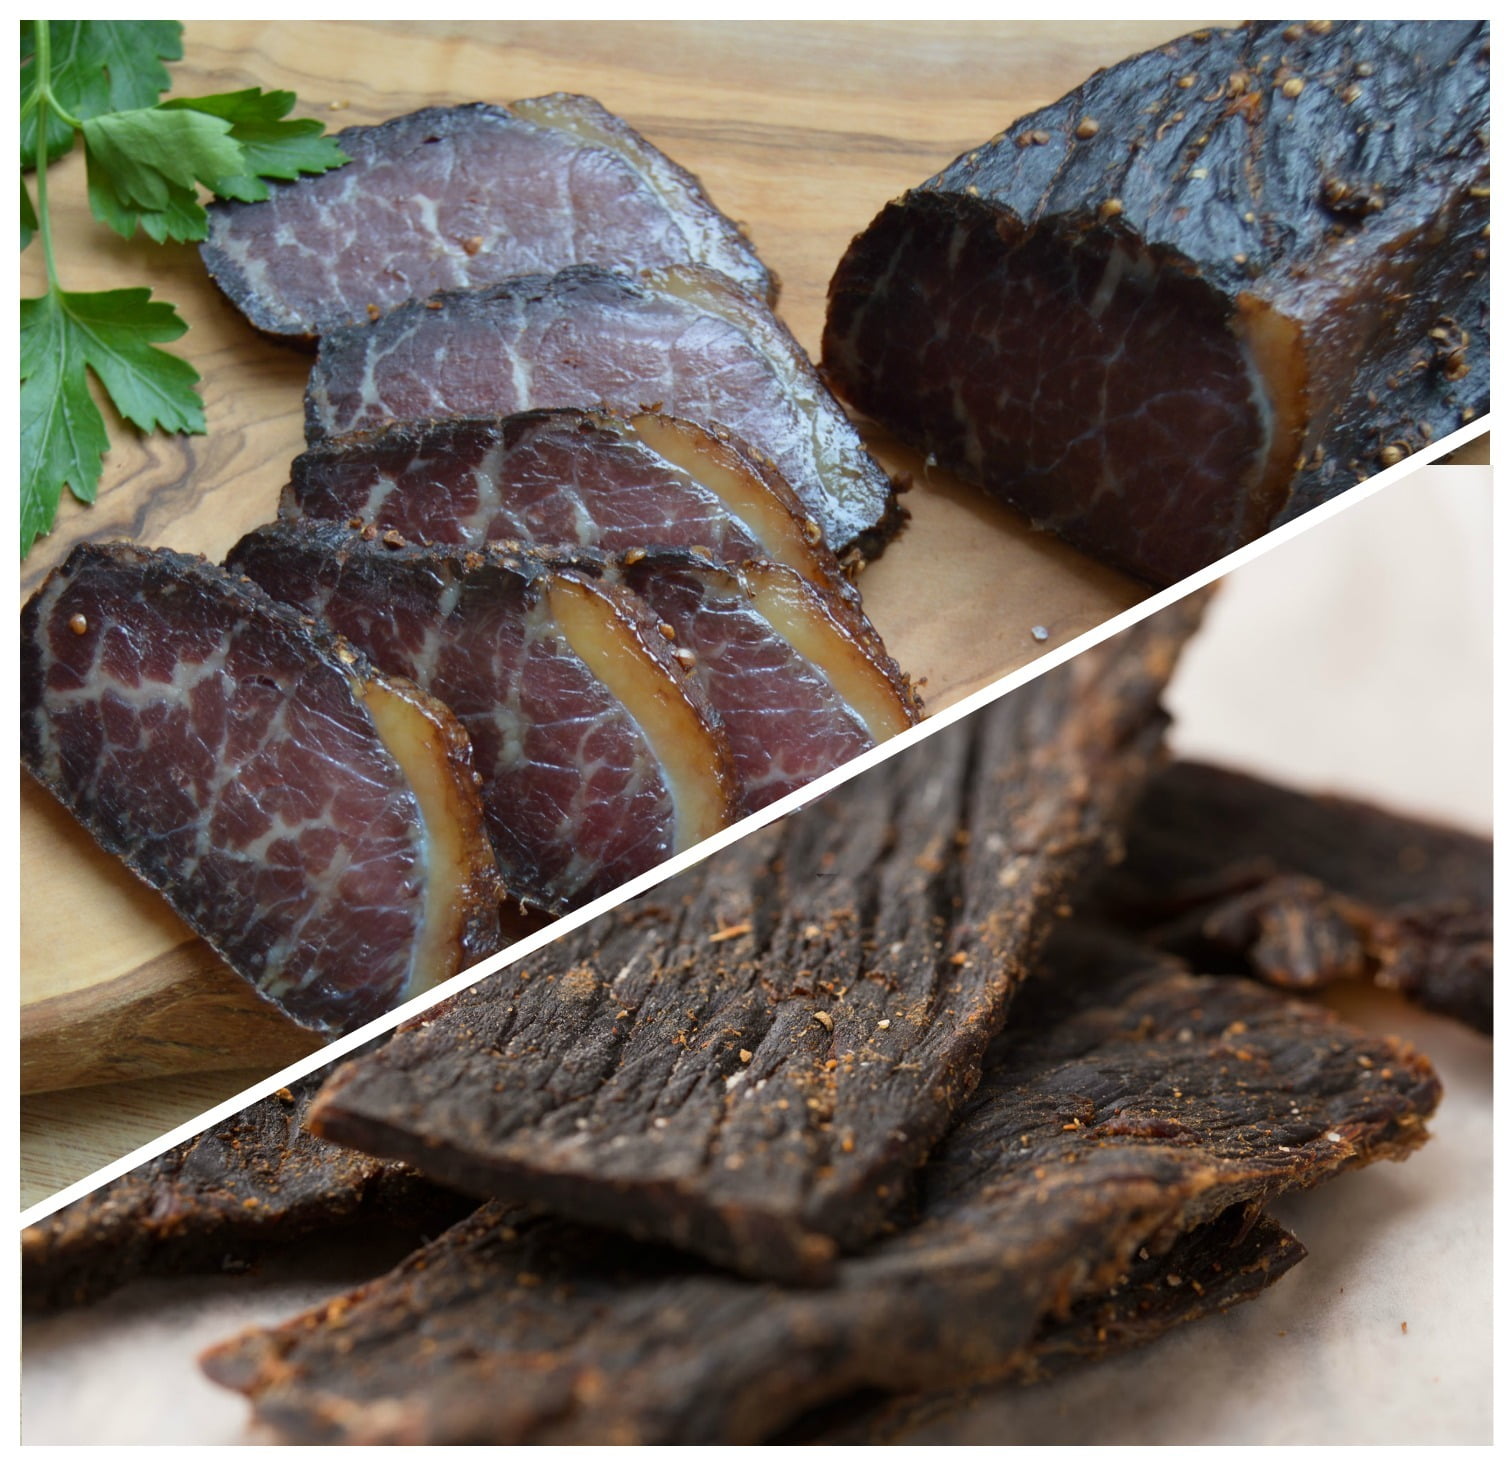 What's the difference between biltong and jerky?